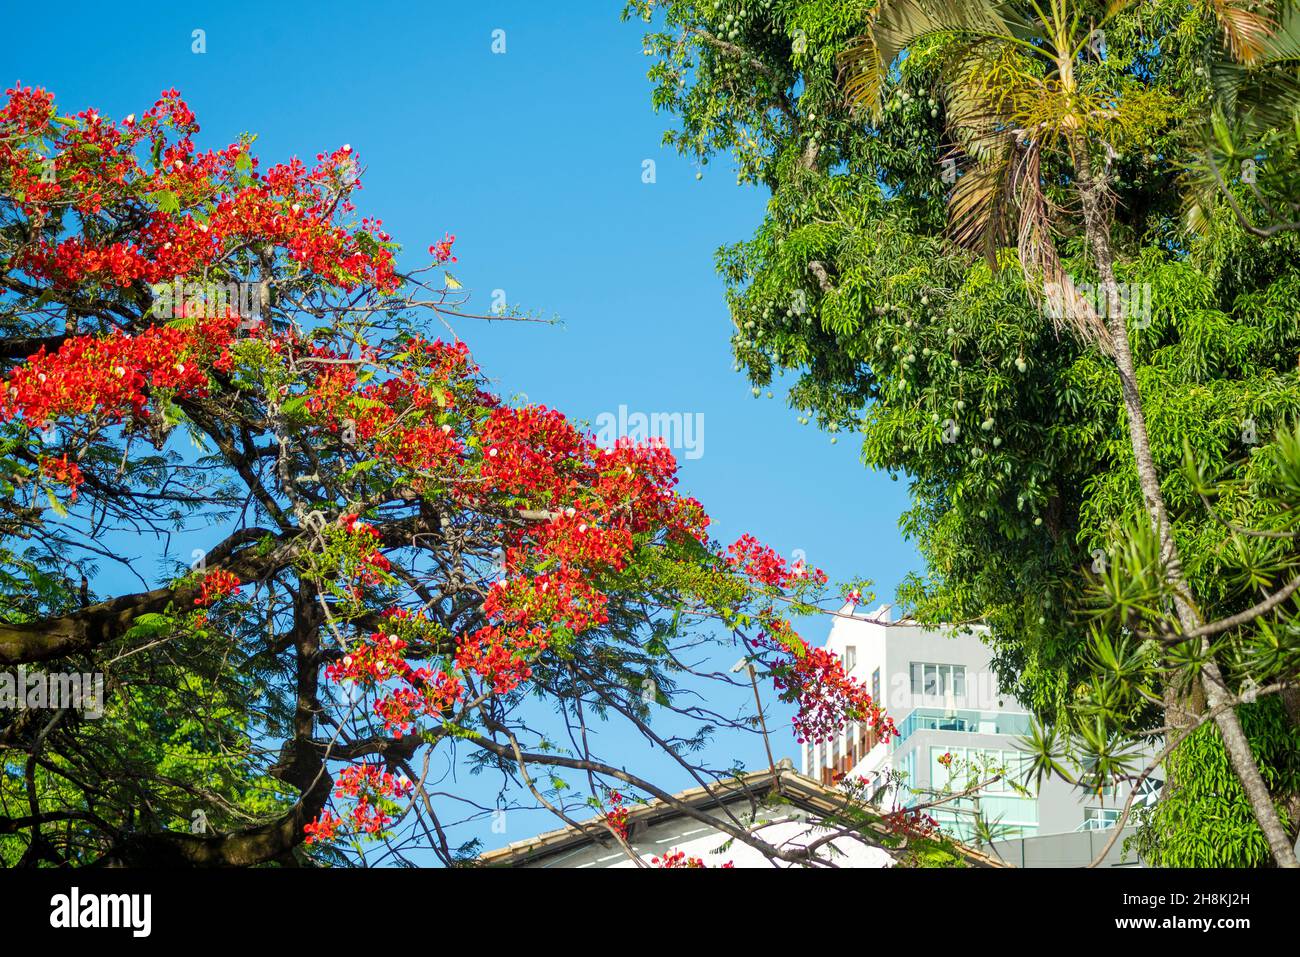 View from below of branches with colorful flowers of a tree against blue sky. Salvador, Bahia, Brazil. Stock Photo